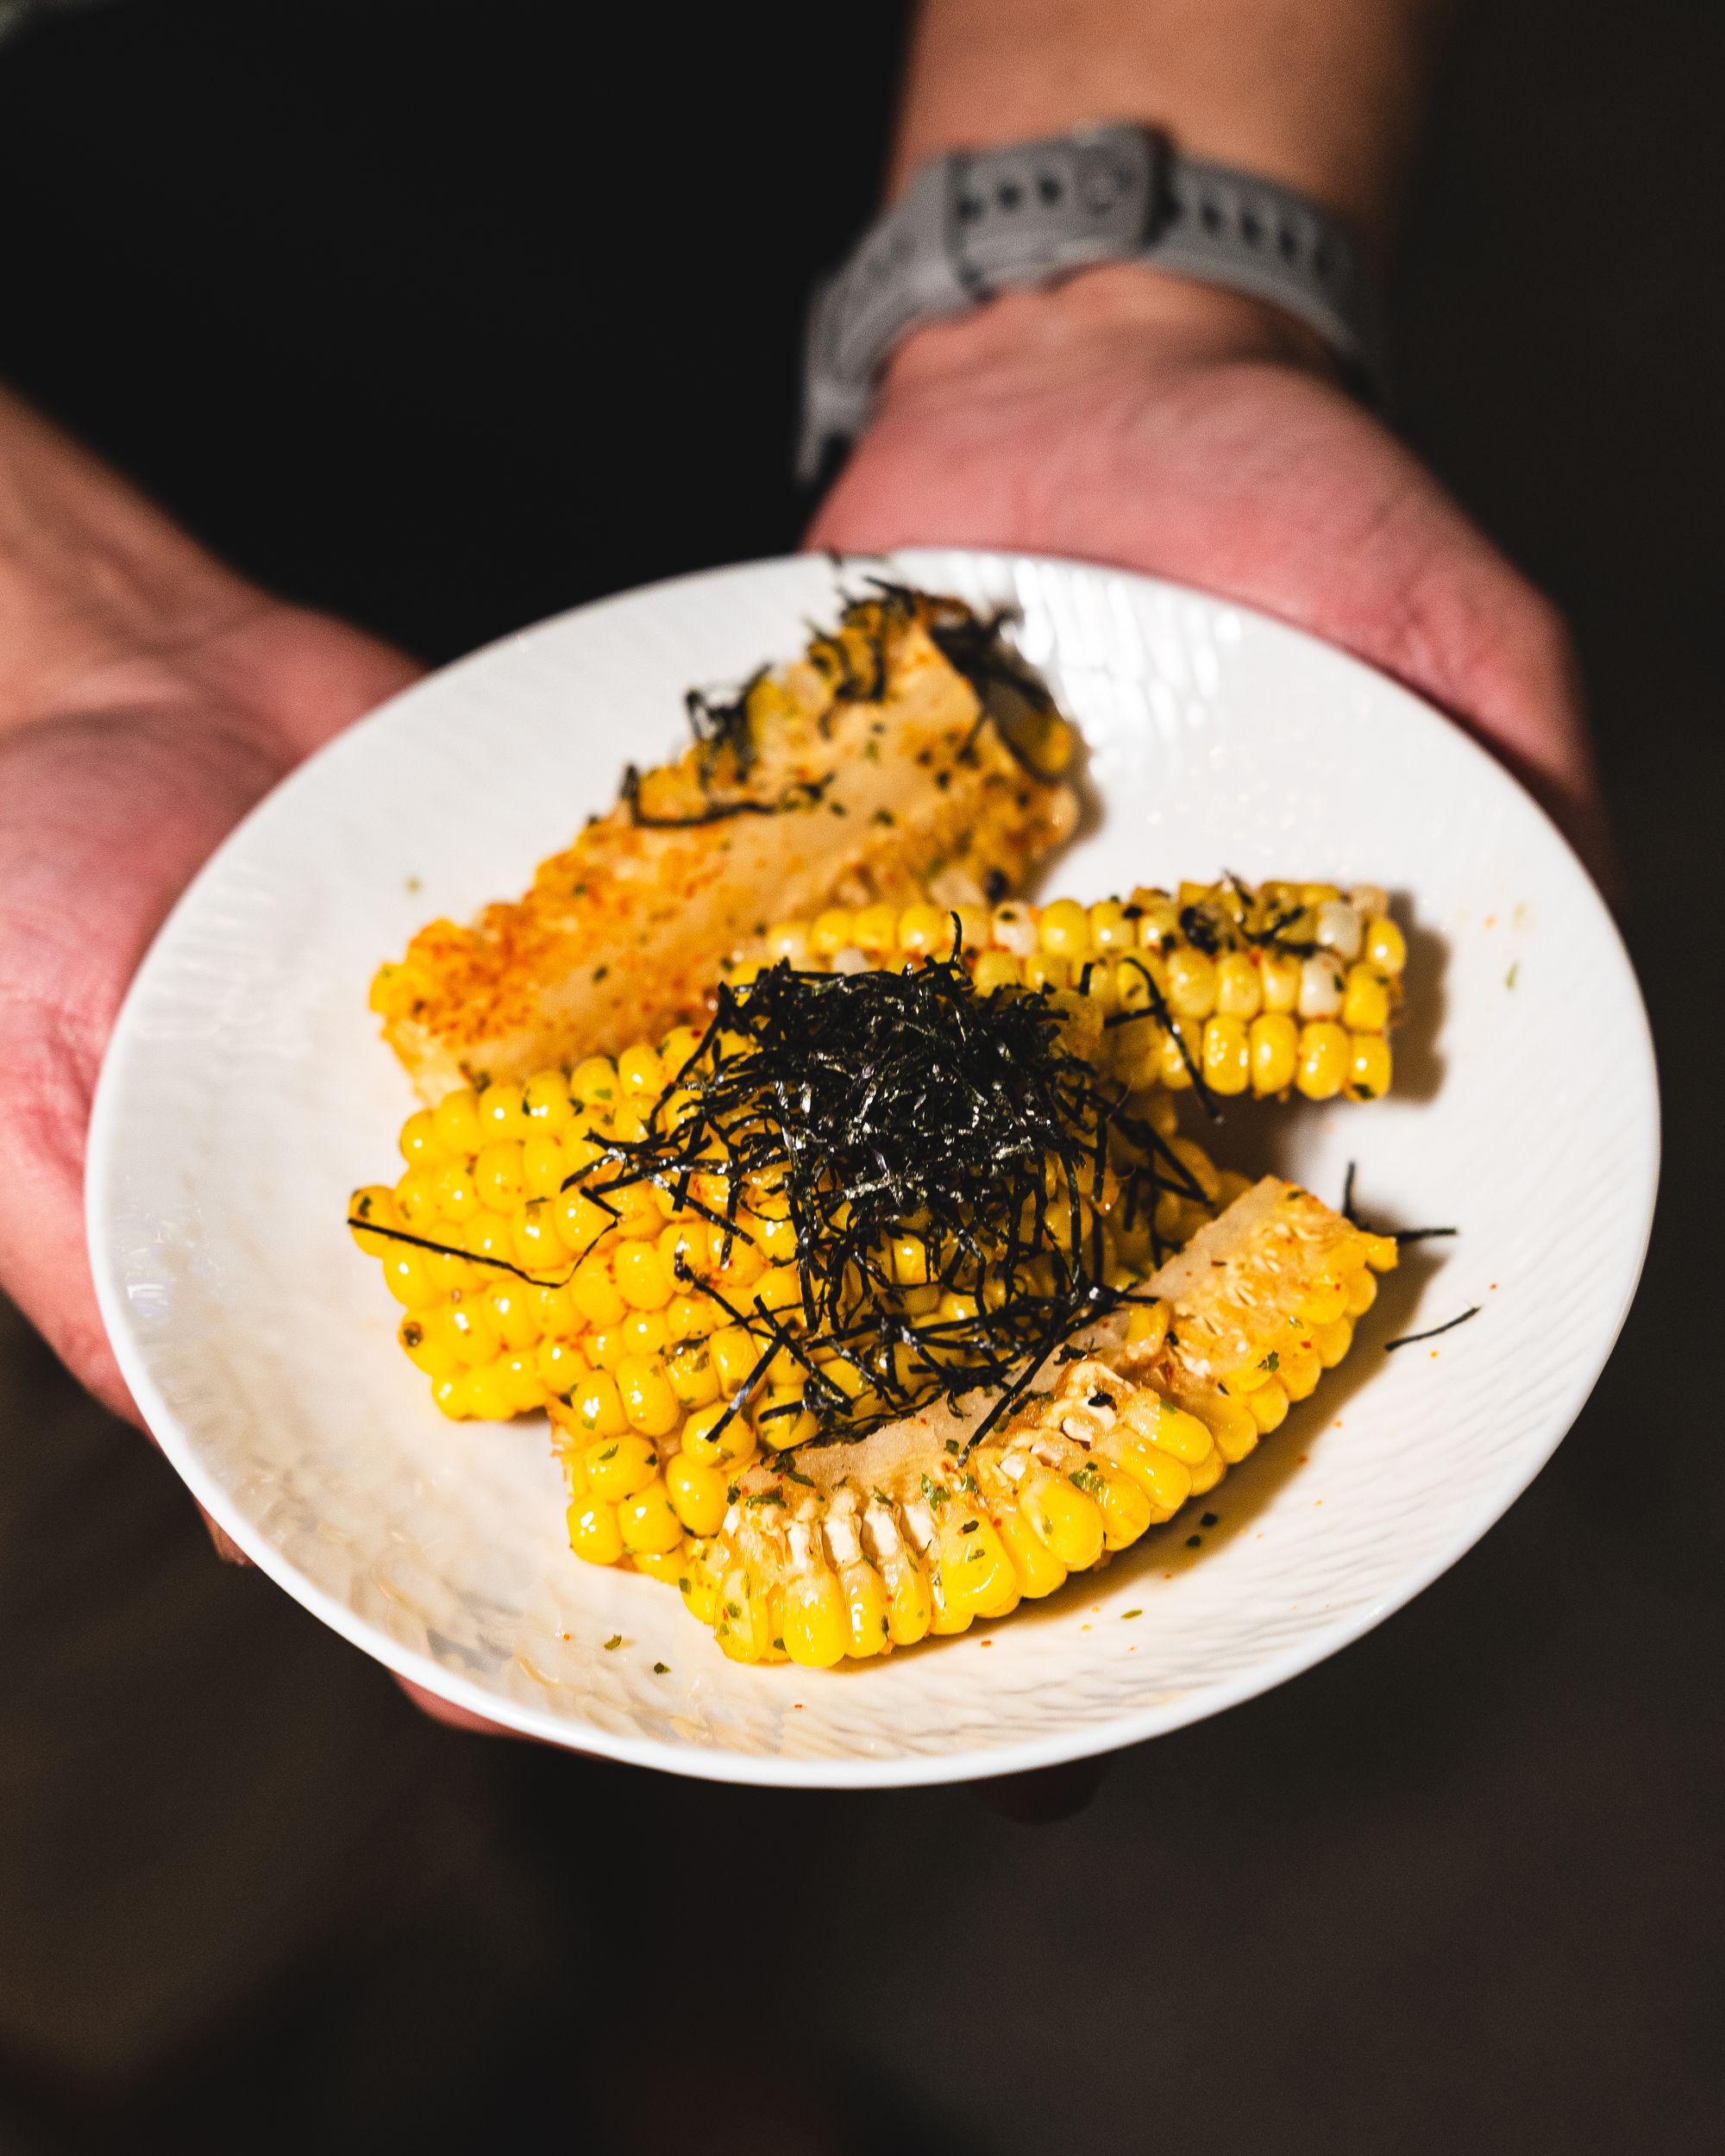 Hand holding corn ribs topped with seaweed